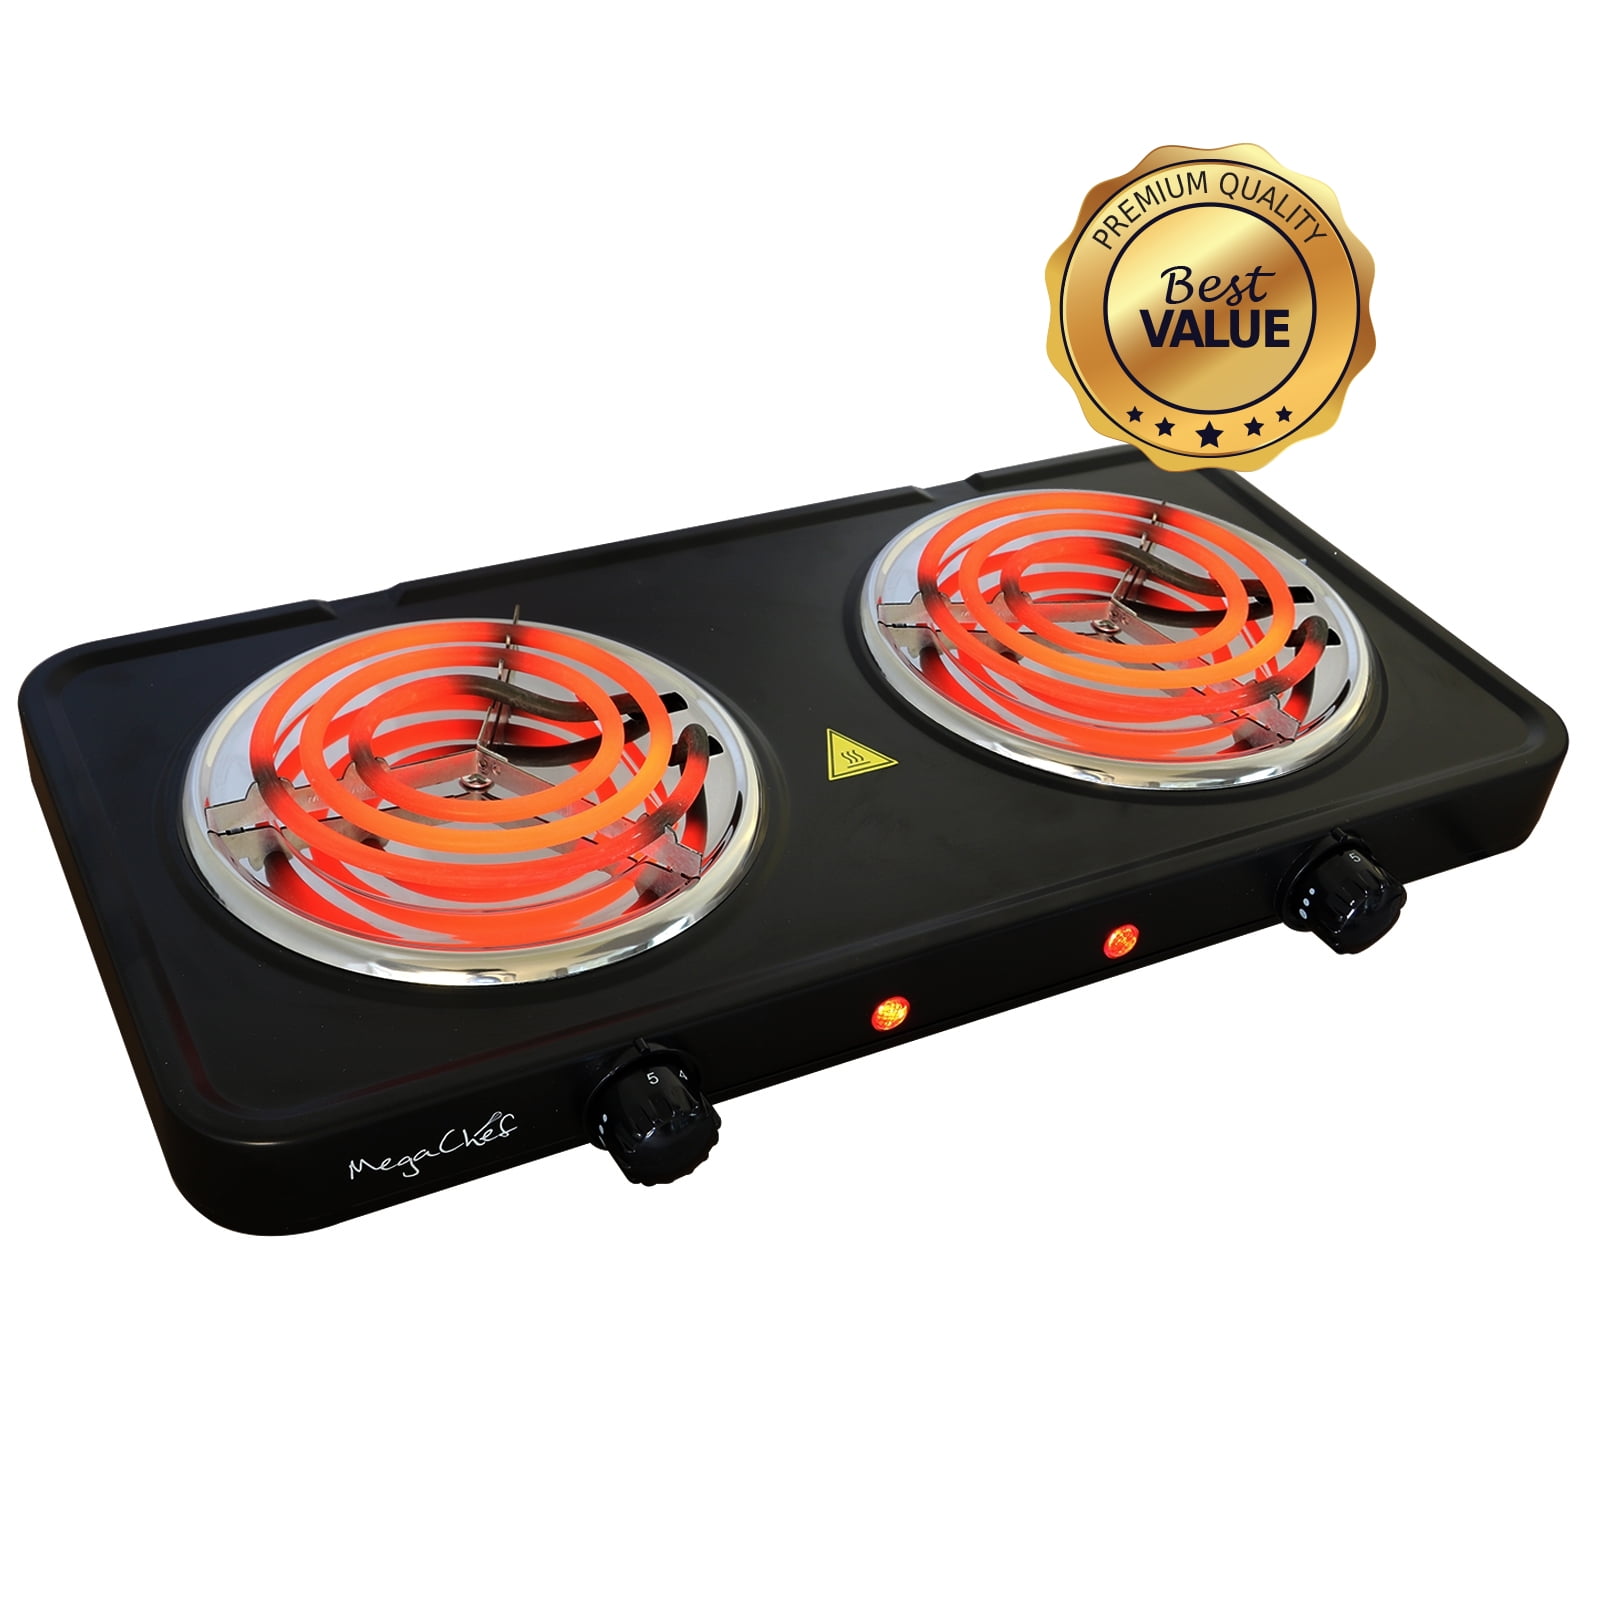 Portable Cooking Stove Mainstays Double Burner 1800W Hot Plate Electric Burner D 